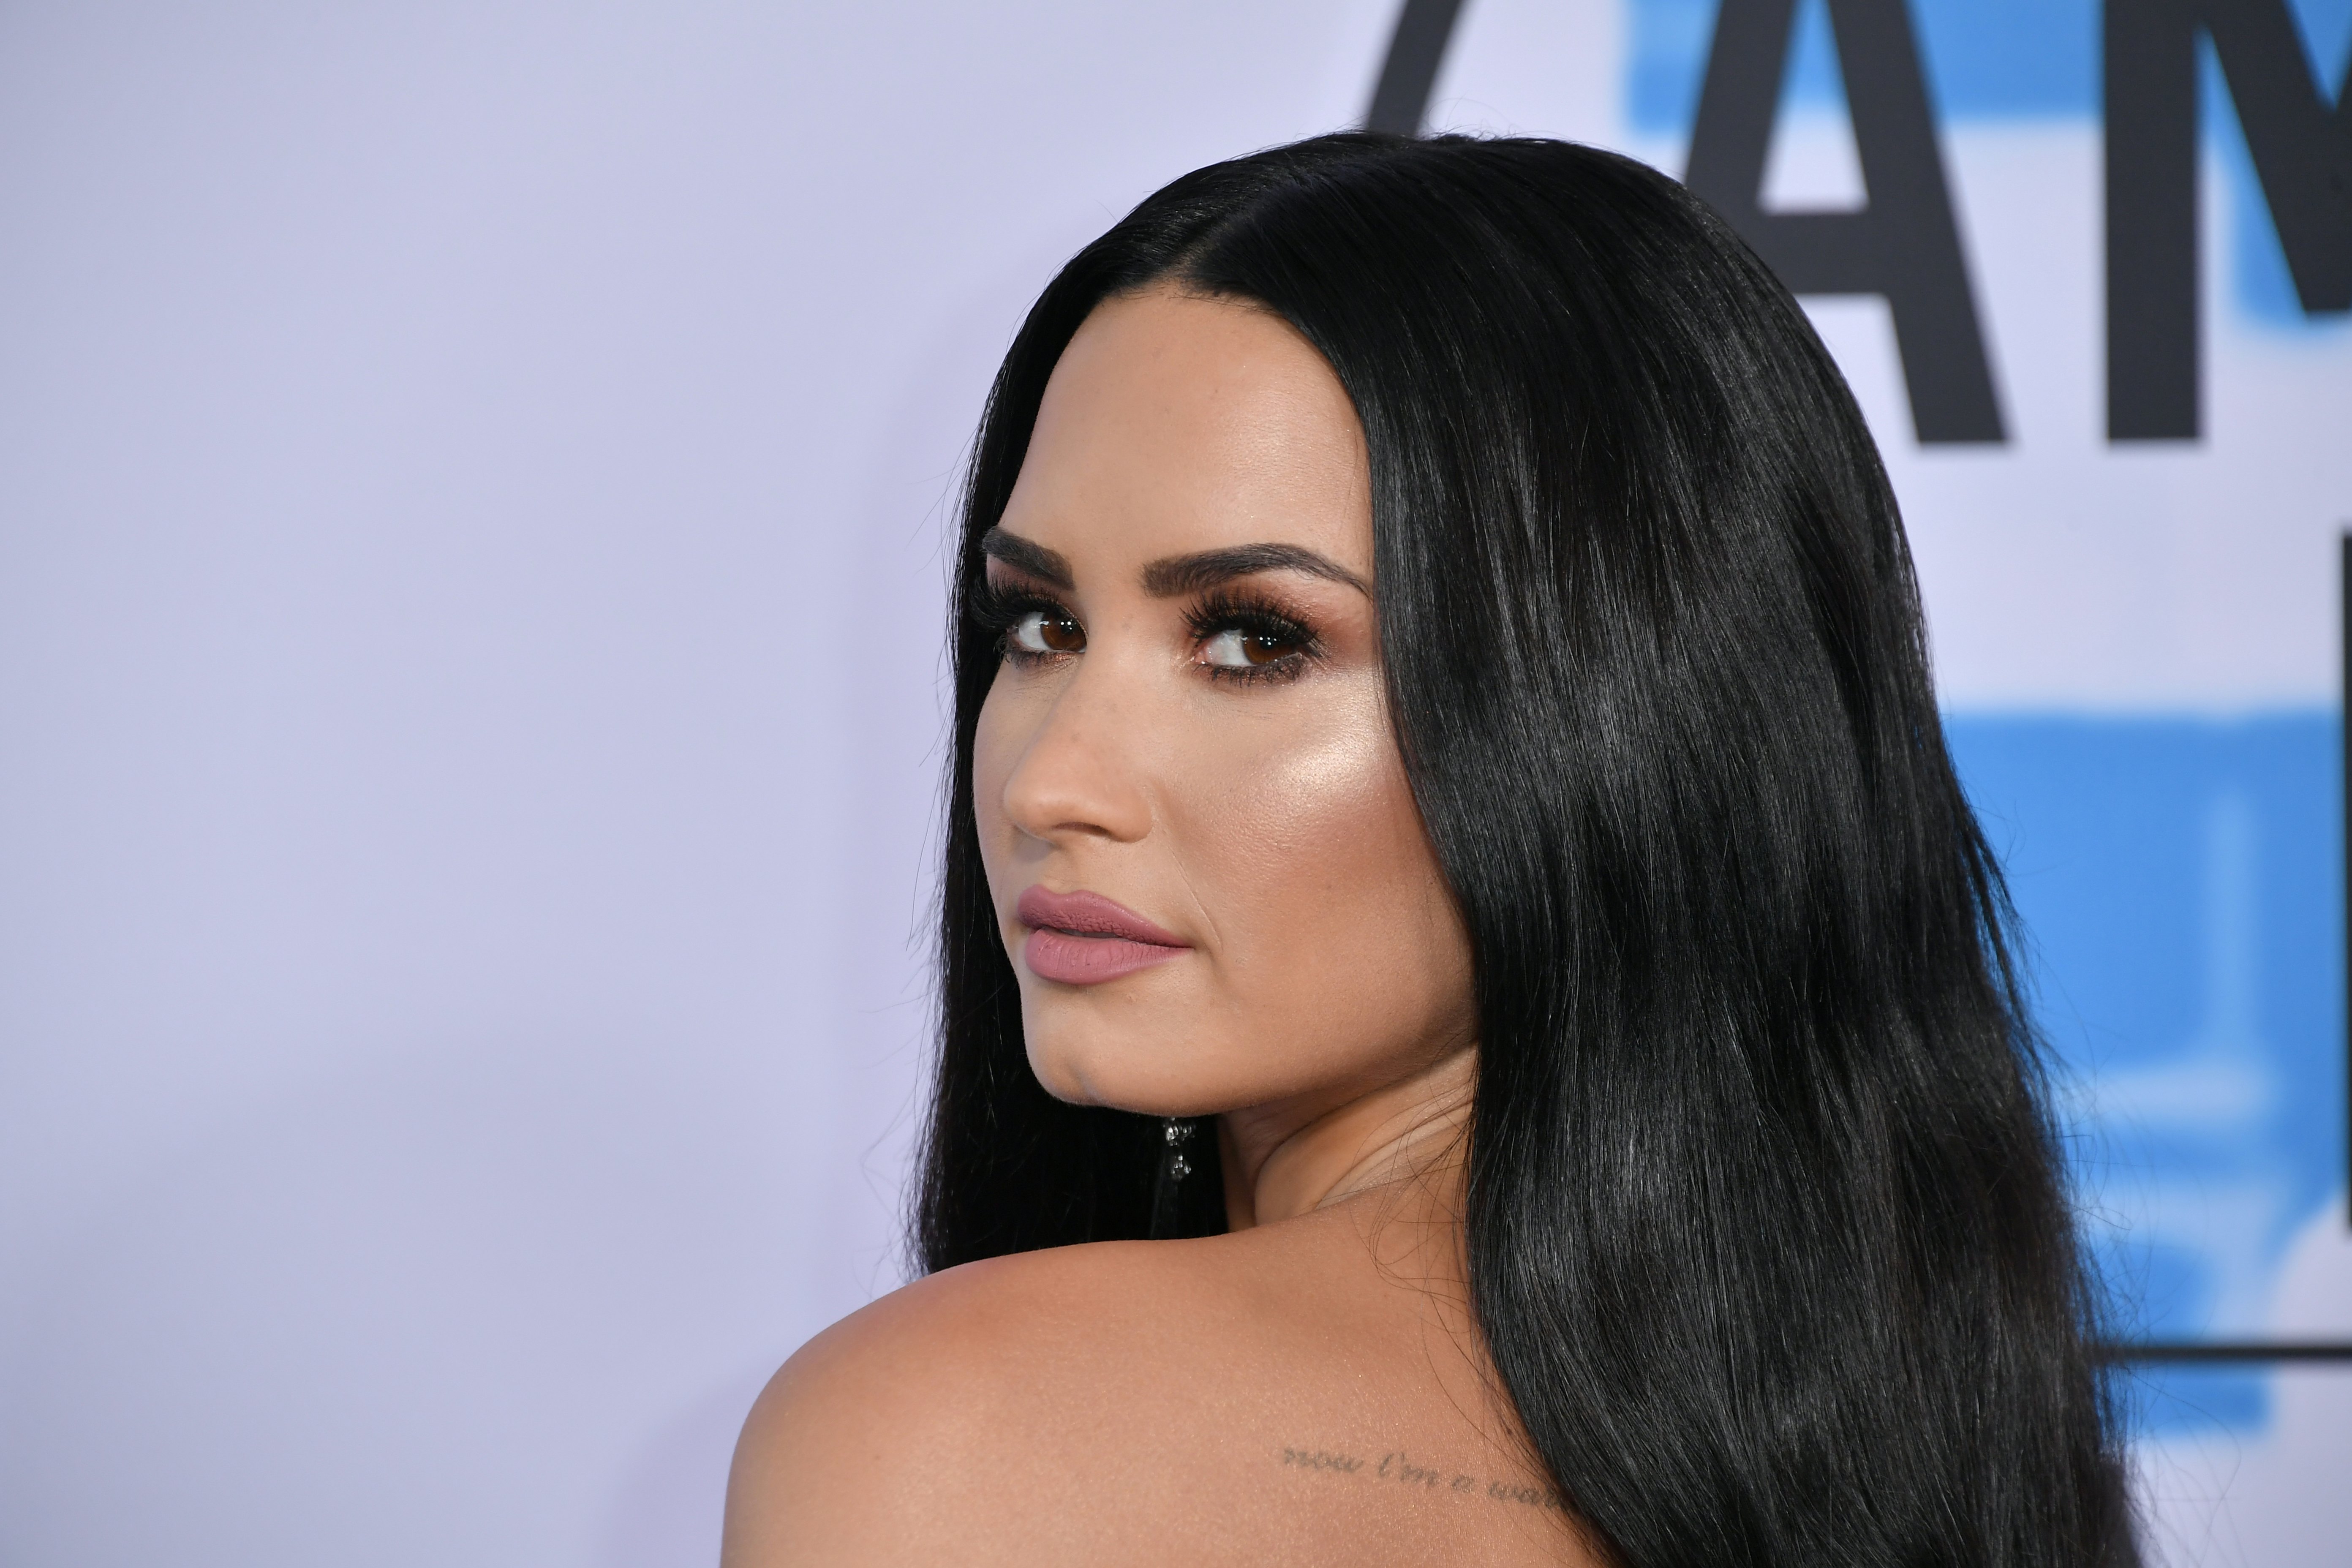 Demi Lovato has “a vision” for her bridal look — but wants to keep